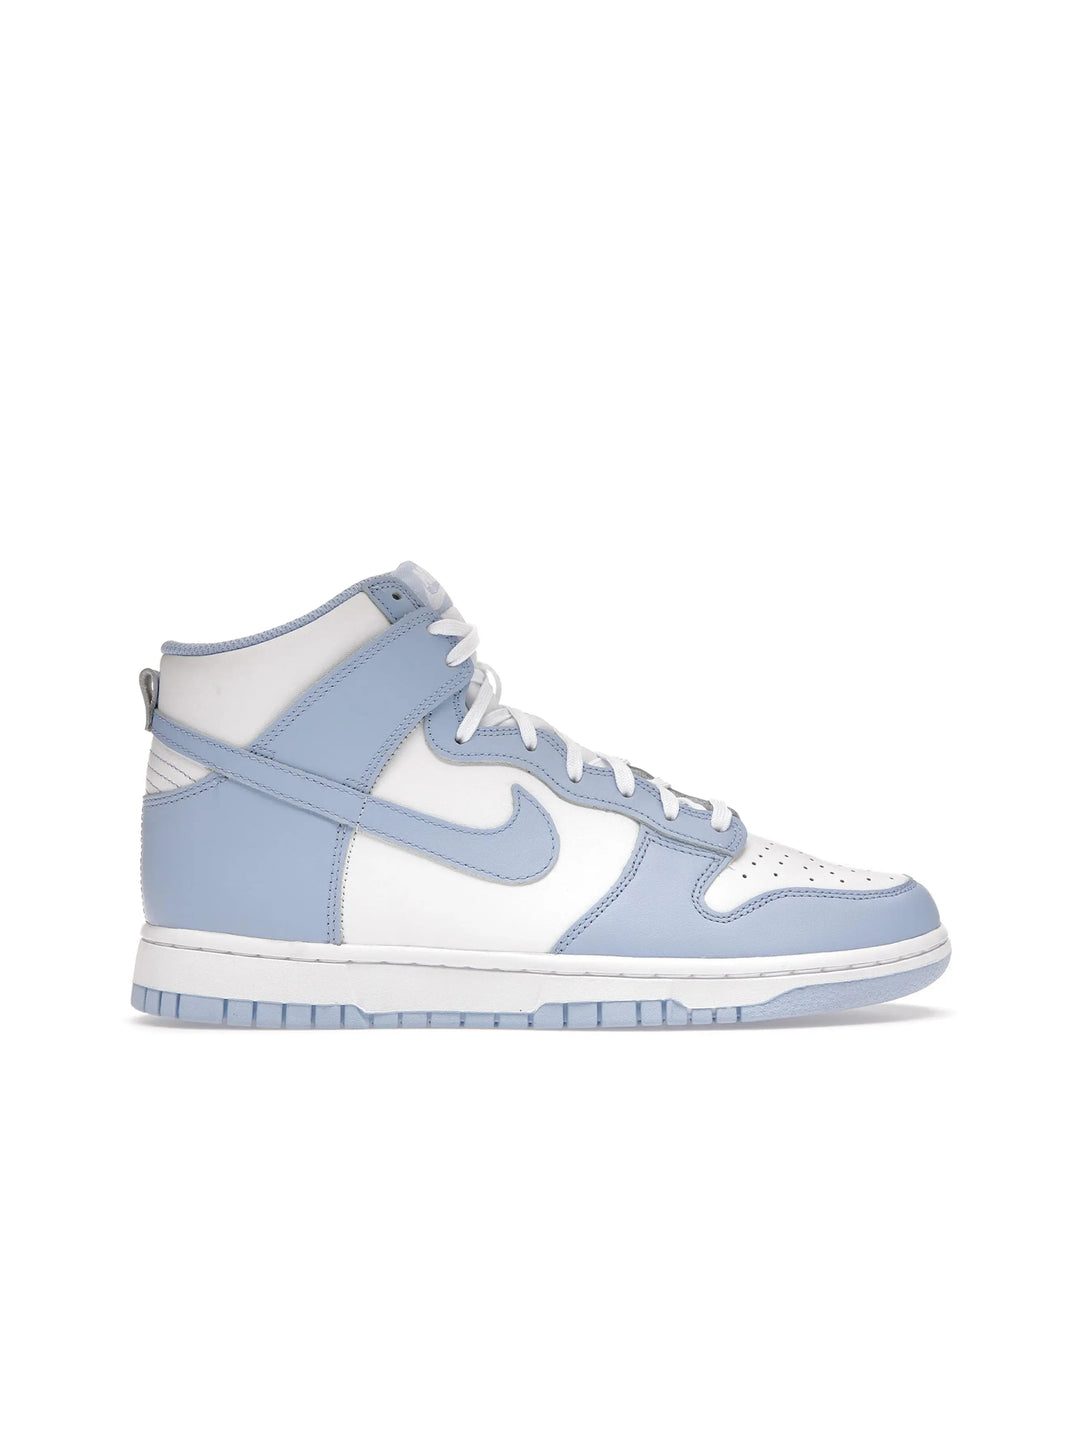 Nike Dunk High Aluminum (W) in Auckland, New Zealand - Shop name